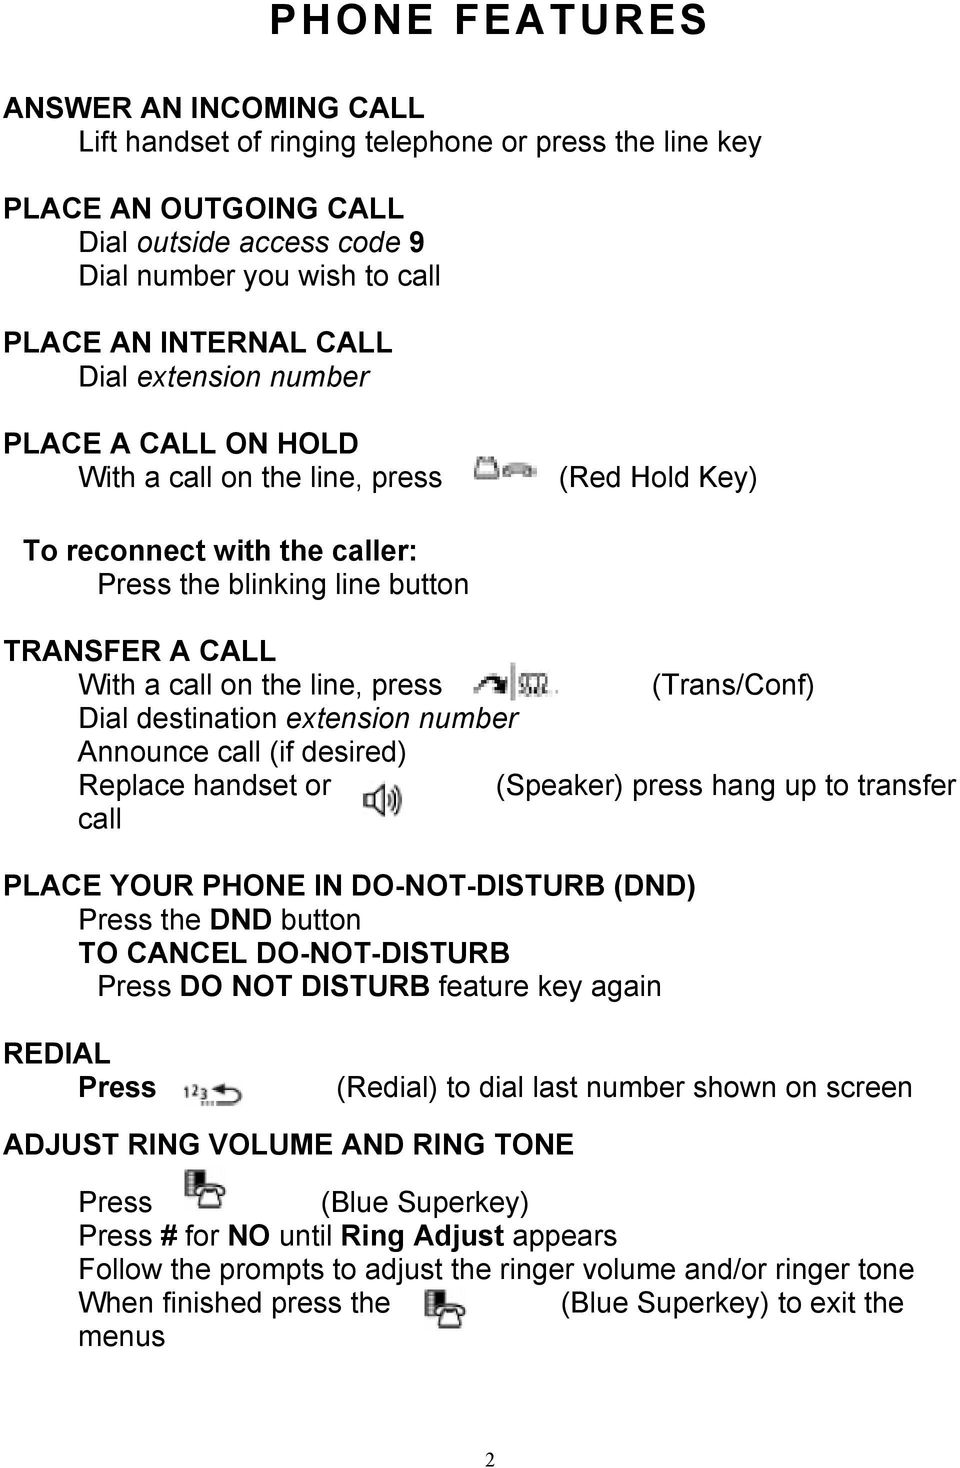 (Trans/Conf) Dial destination extension number Announce call (if desired) Replace handset or (Speaker) press hang up to transfer call PLACE YOUR PHONE IN DO-NOT-DISTURB (DND) Press the DND button TO